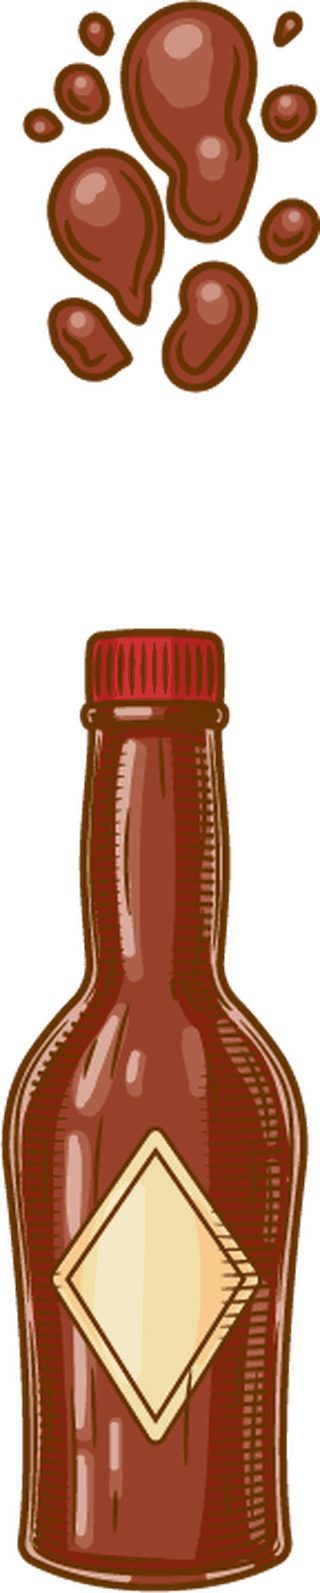 vectorillustration-engraving-style-different-sauces-are-poured-from-bottles-973964